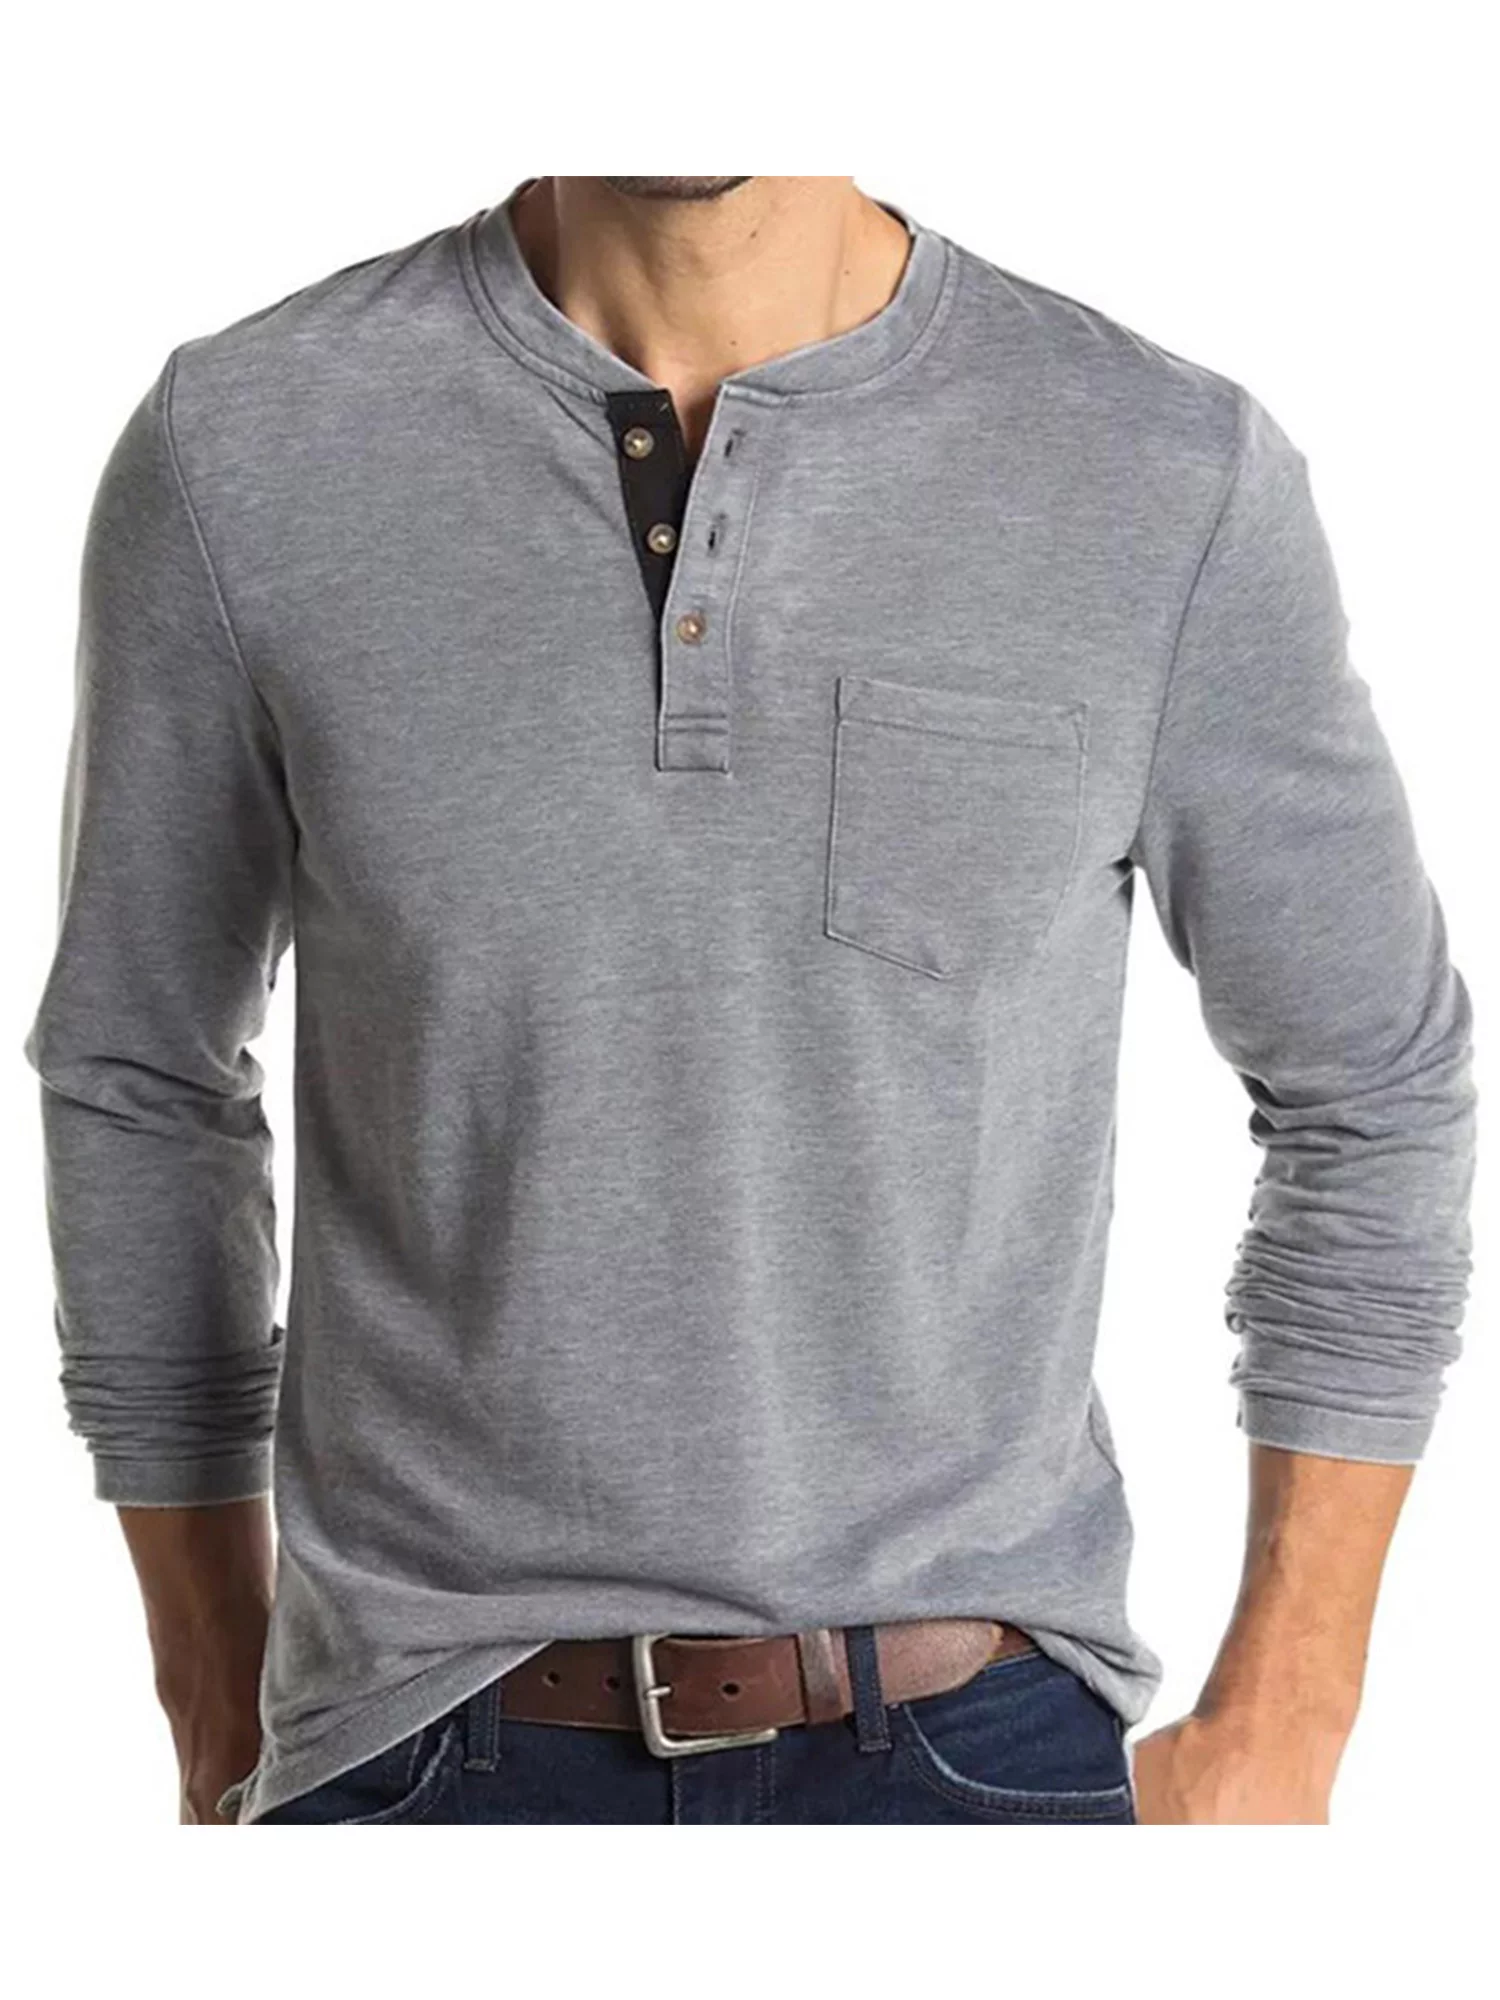 Mens Summer Henley Shirts Short Sleeve Crew Neck Casual T Shirts Tops Basic Solid Color Pullover With Pocket